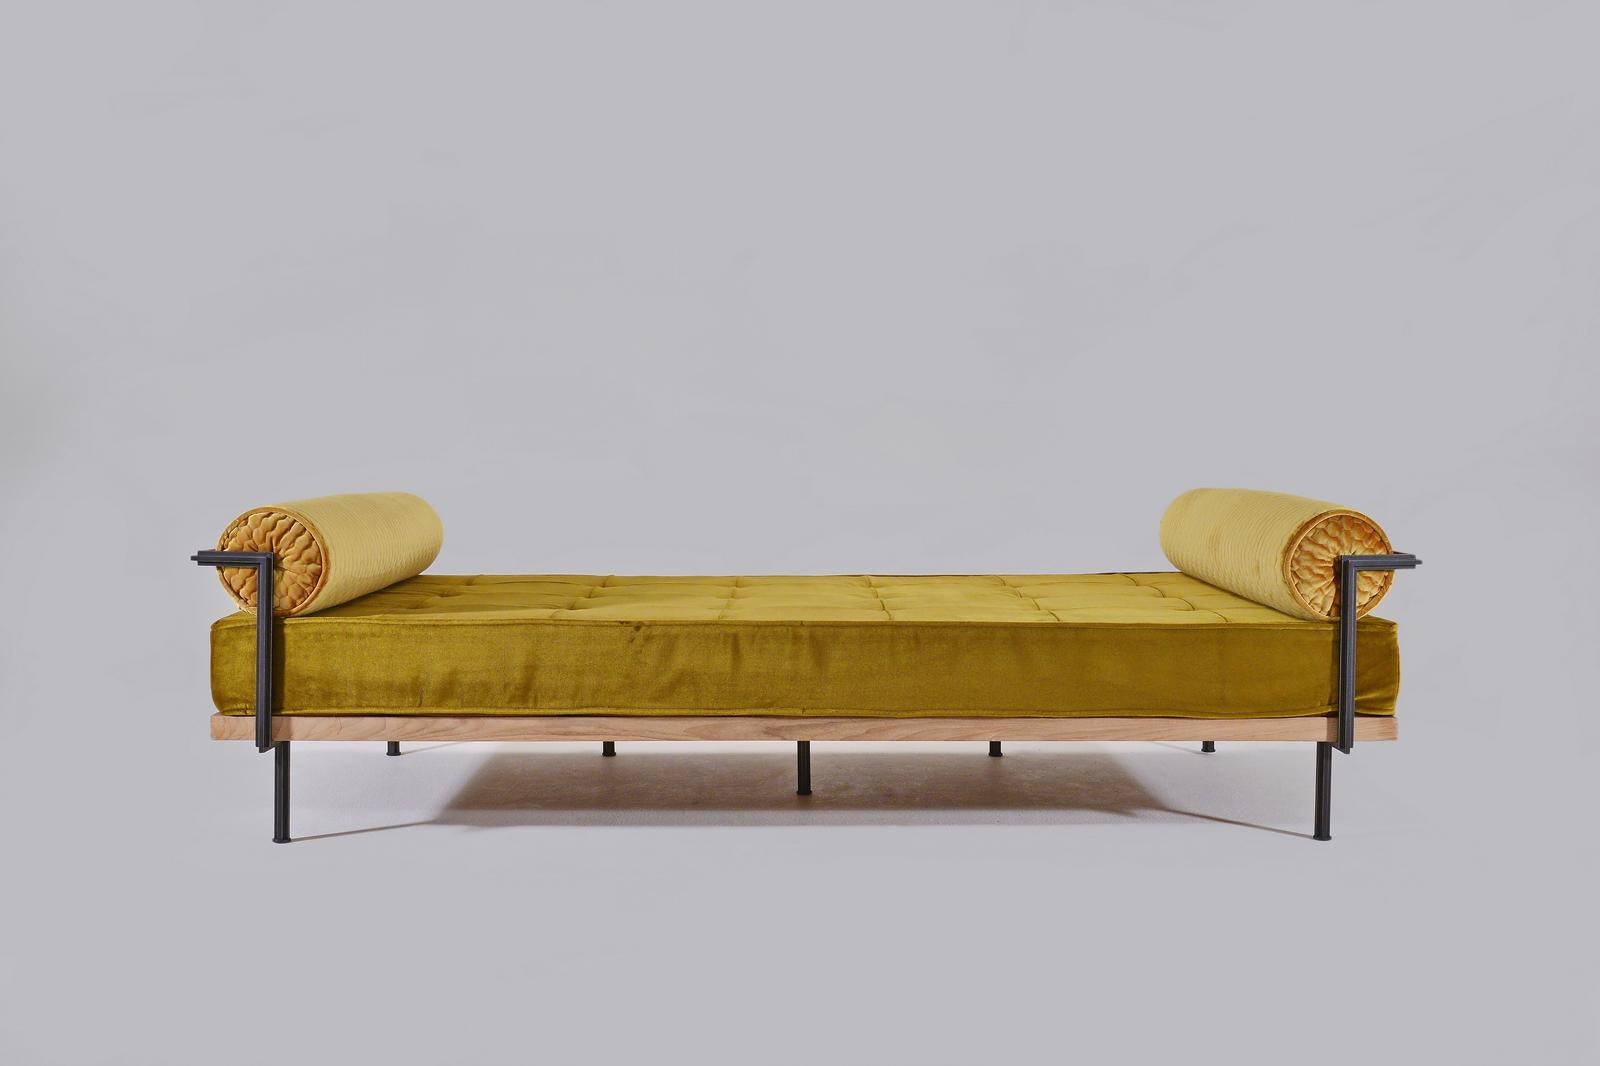 This sofa/daybed is a perfect example of our bespoke service: a New York client wondered if we could add a removable backrest to our daybed? We spent a few hours pondering, cutting, welding and turning to come up with a solution which suited her